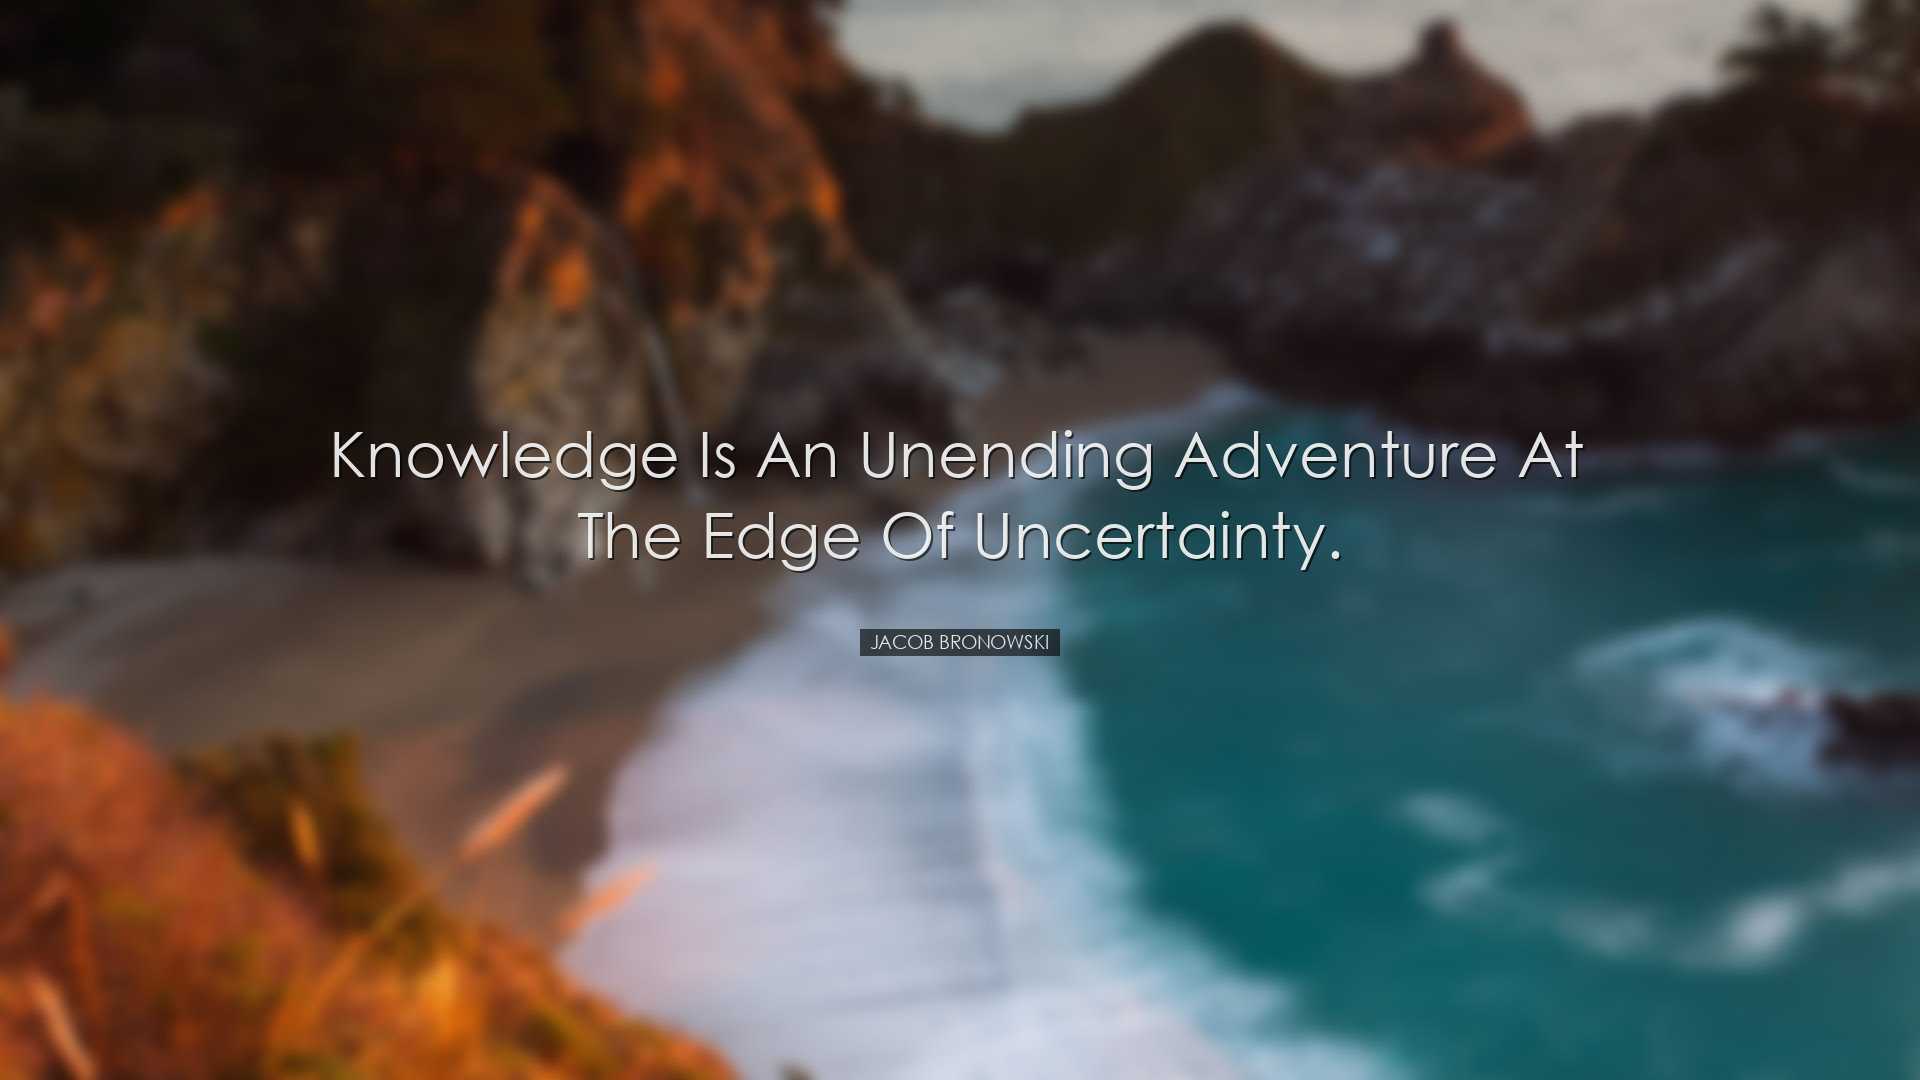 Knowledge is an unending adventure at the edge of uncertainty. - J